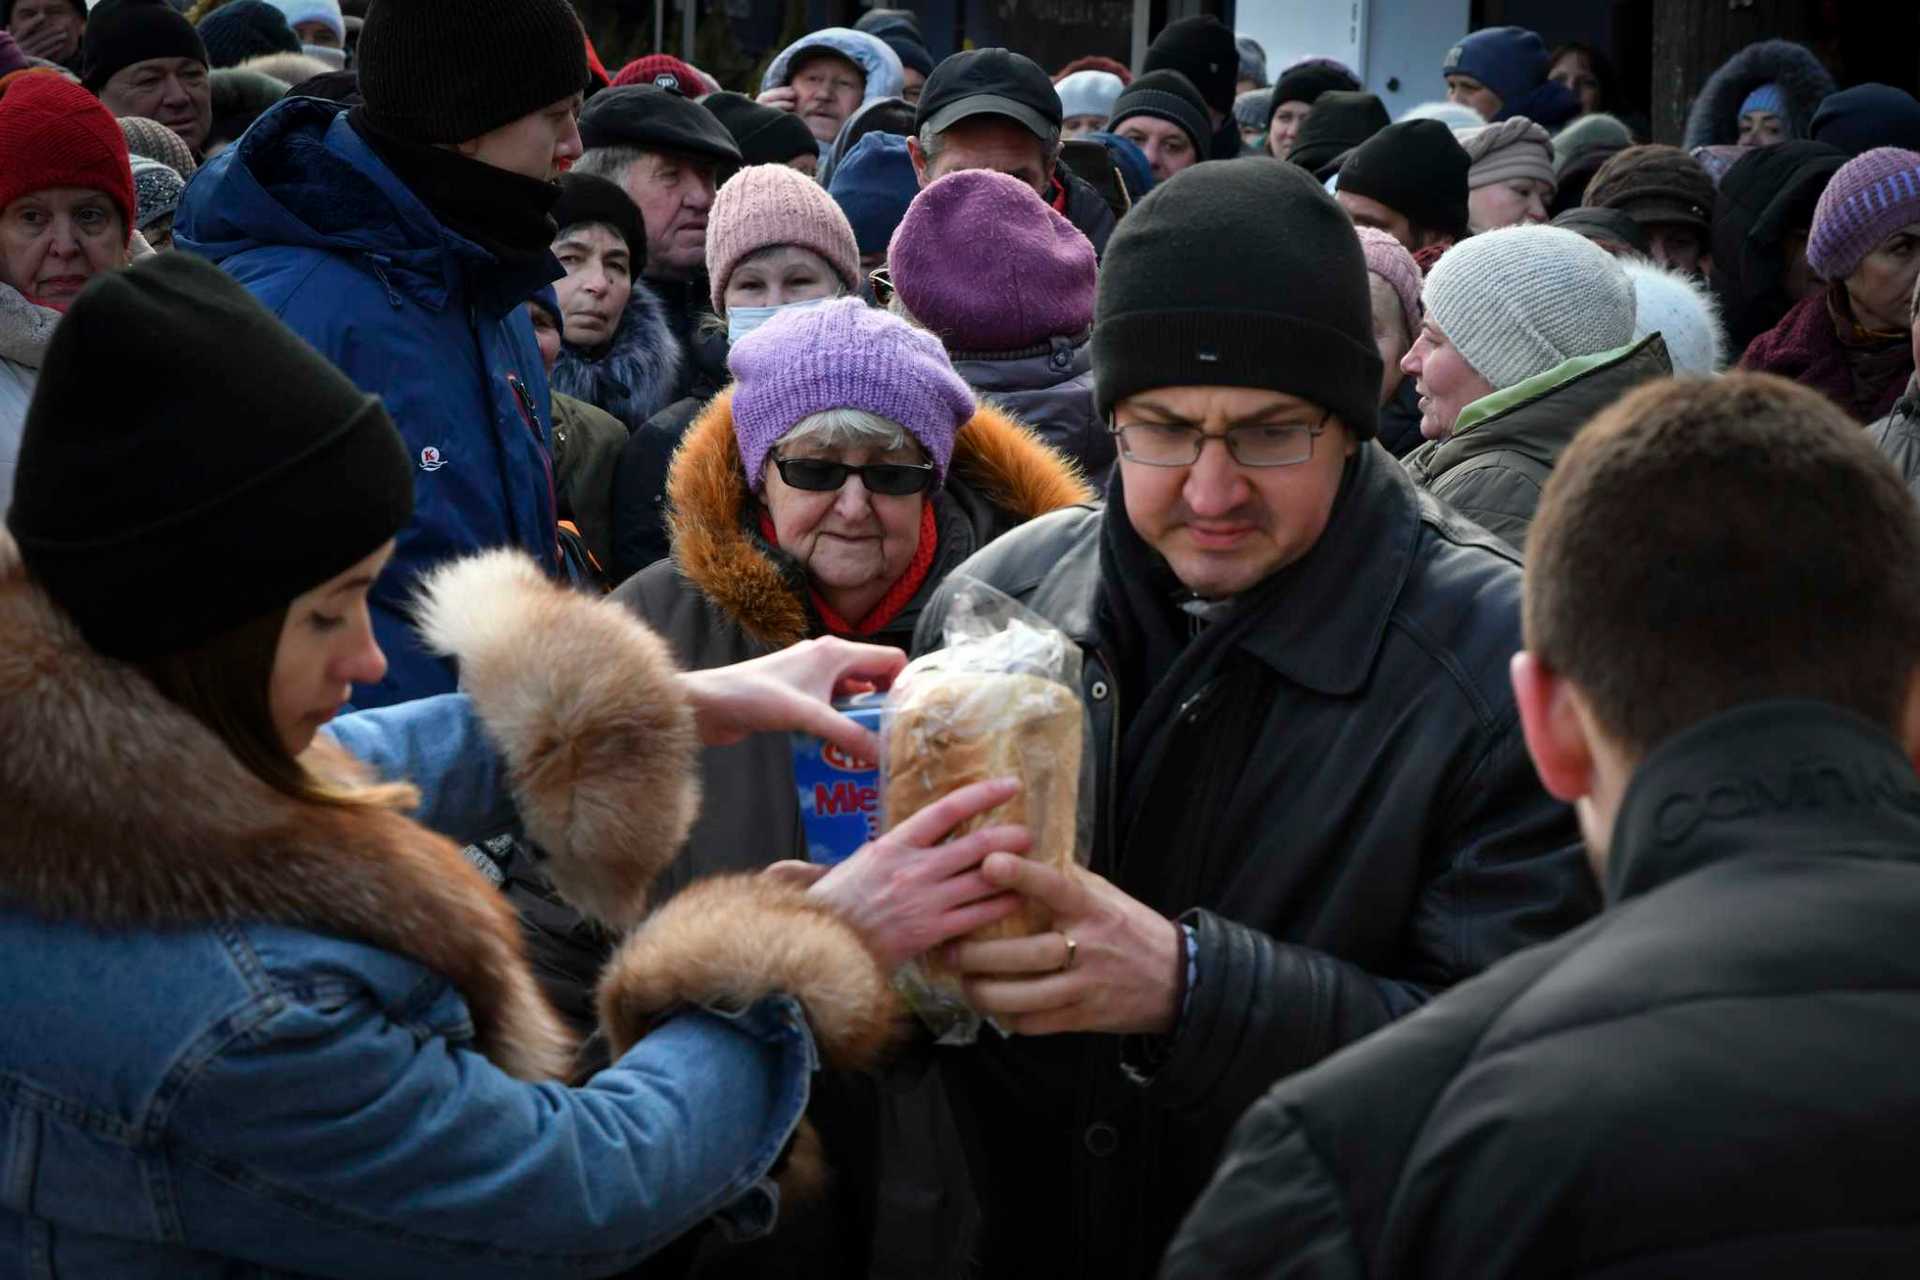 People receive bread at a humanitarian aid distribution spot in Zaporizhzhya